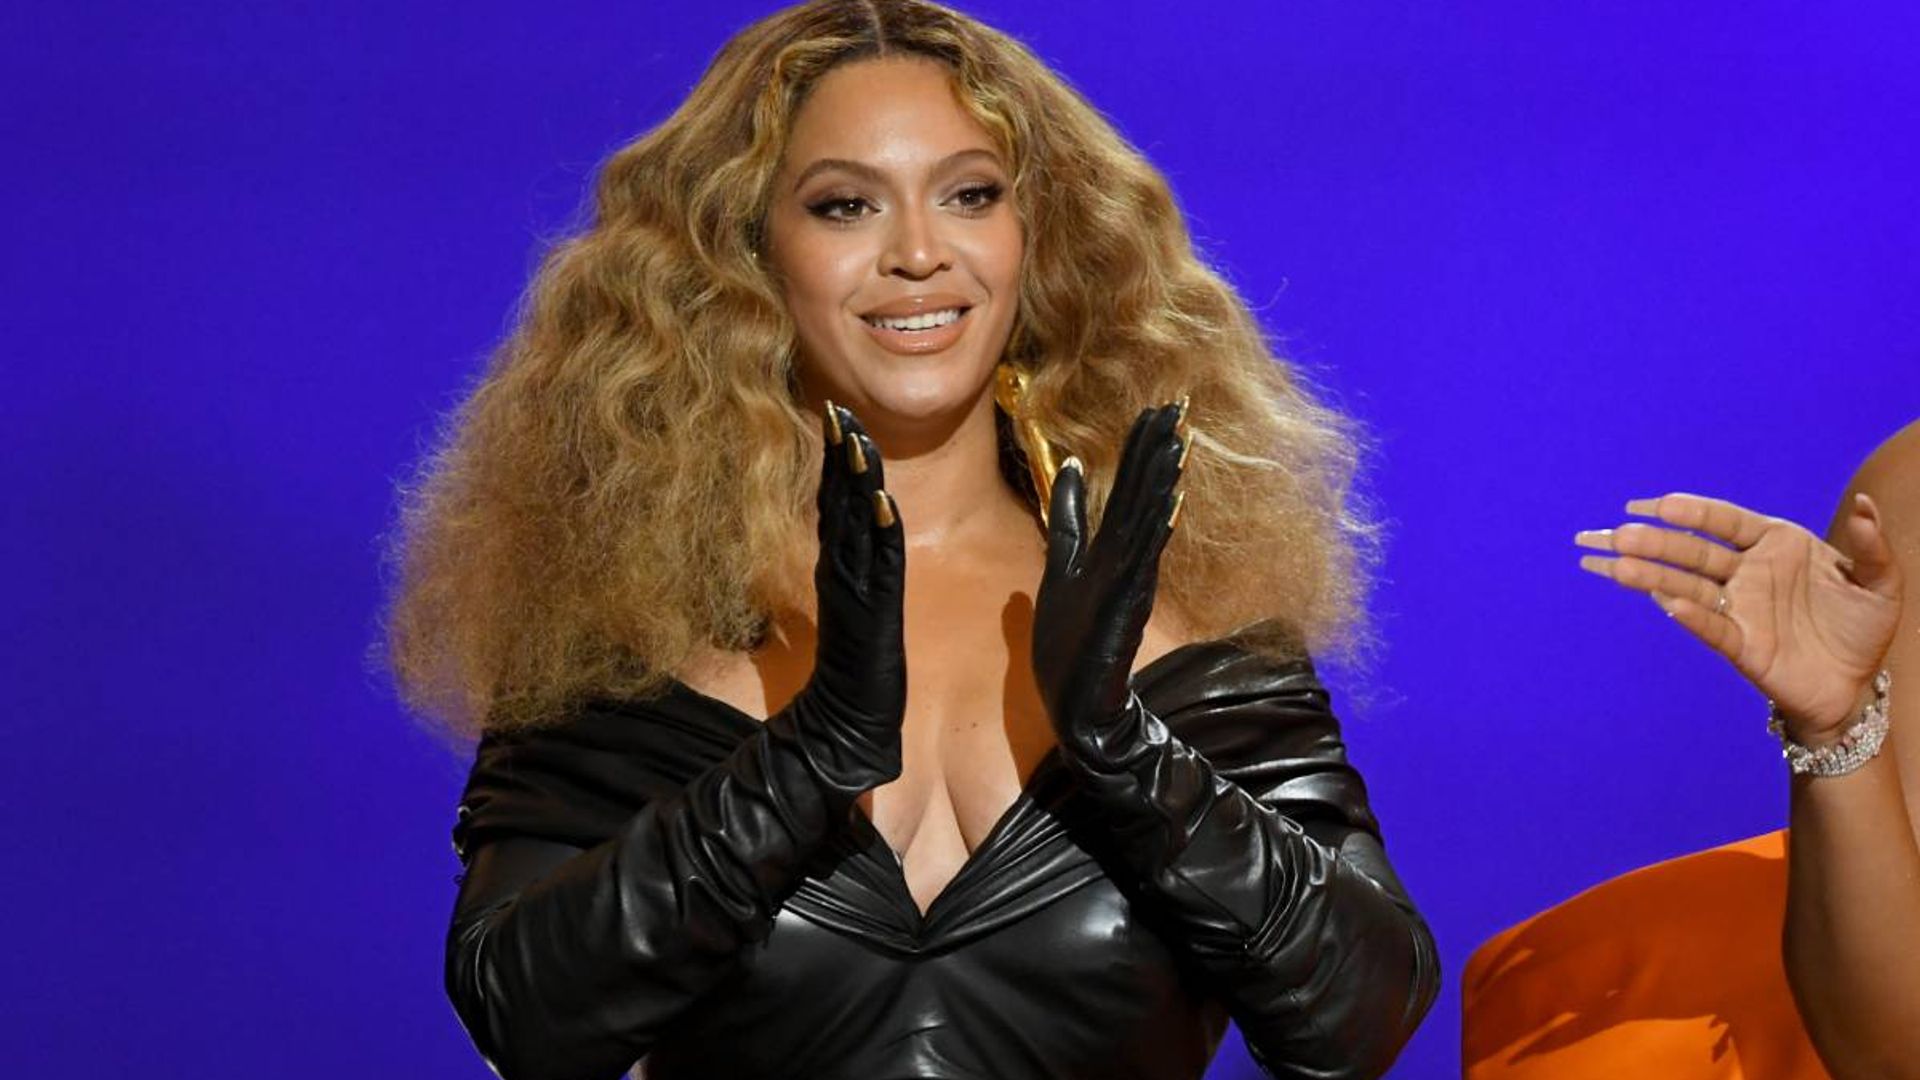 Beyoncé makes Grammys history in the most incredible leather mini dress